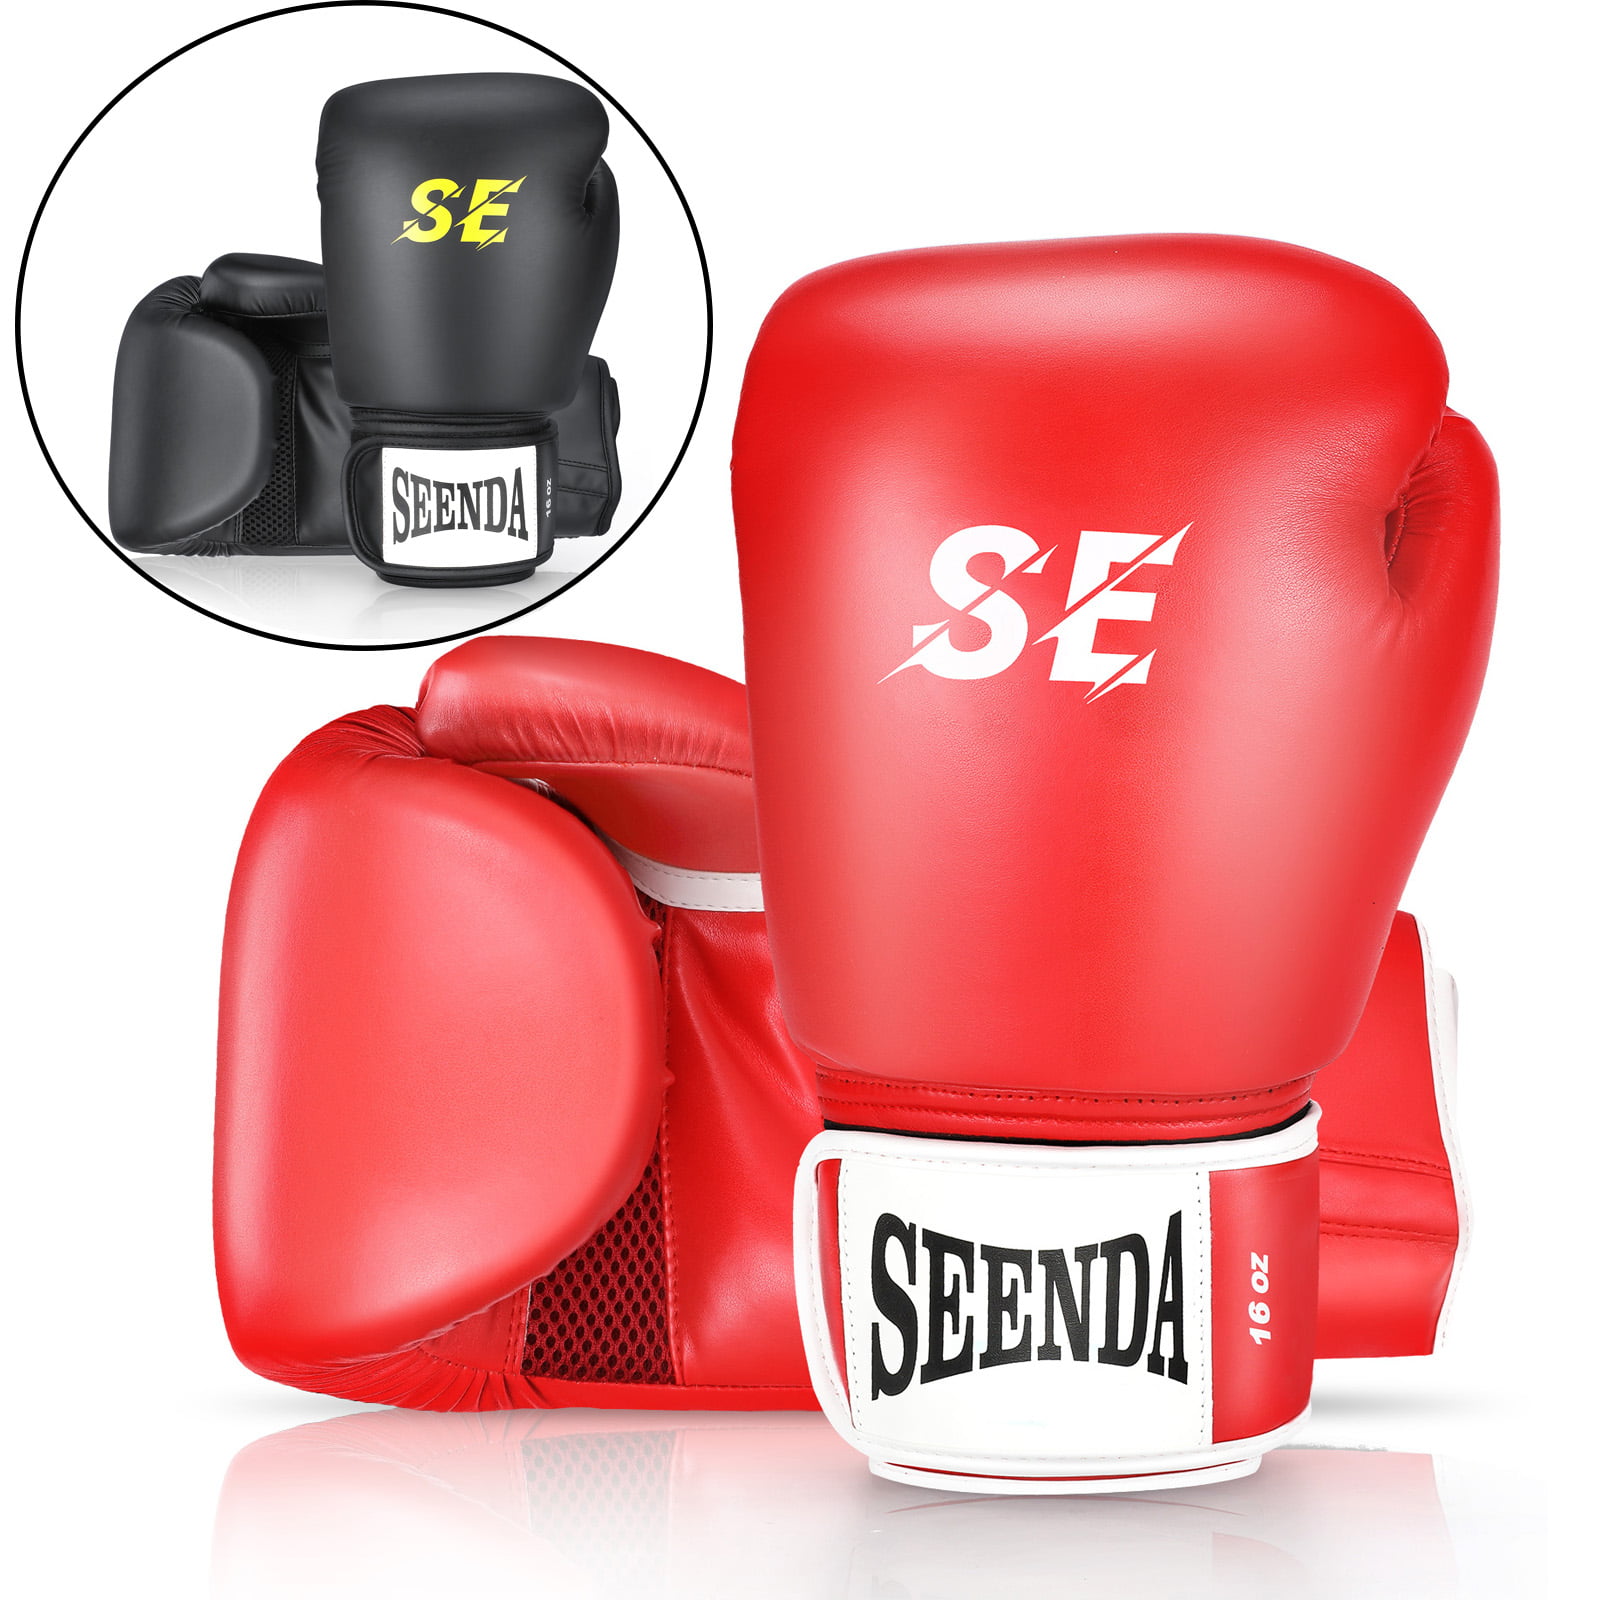 Professional Boxing Gloves Sparring Glove Punch Bag Training MMA Mitts Kickboxin 